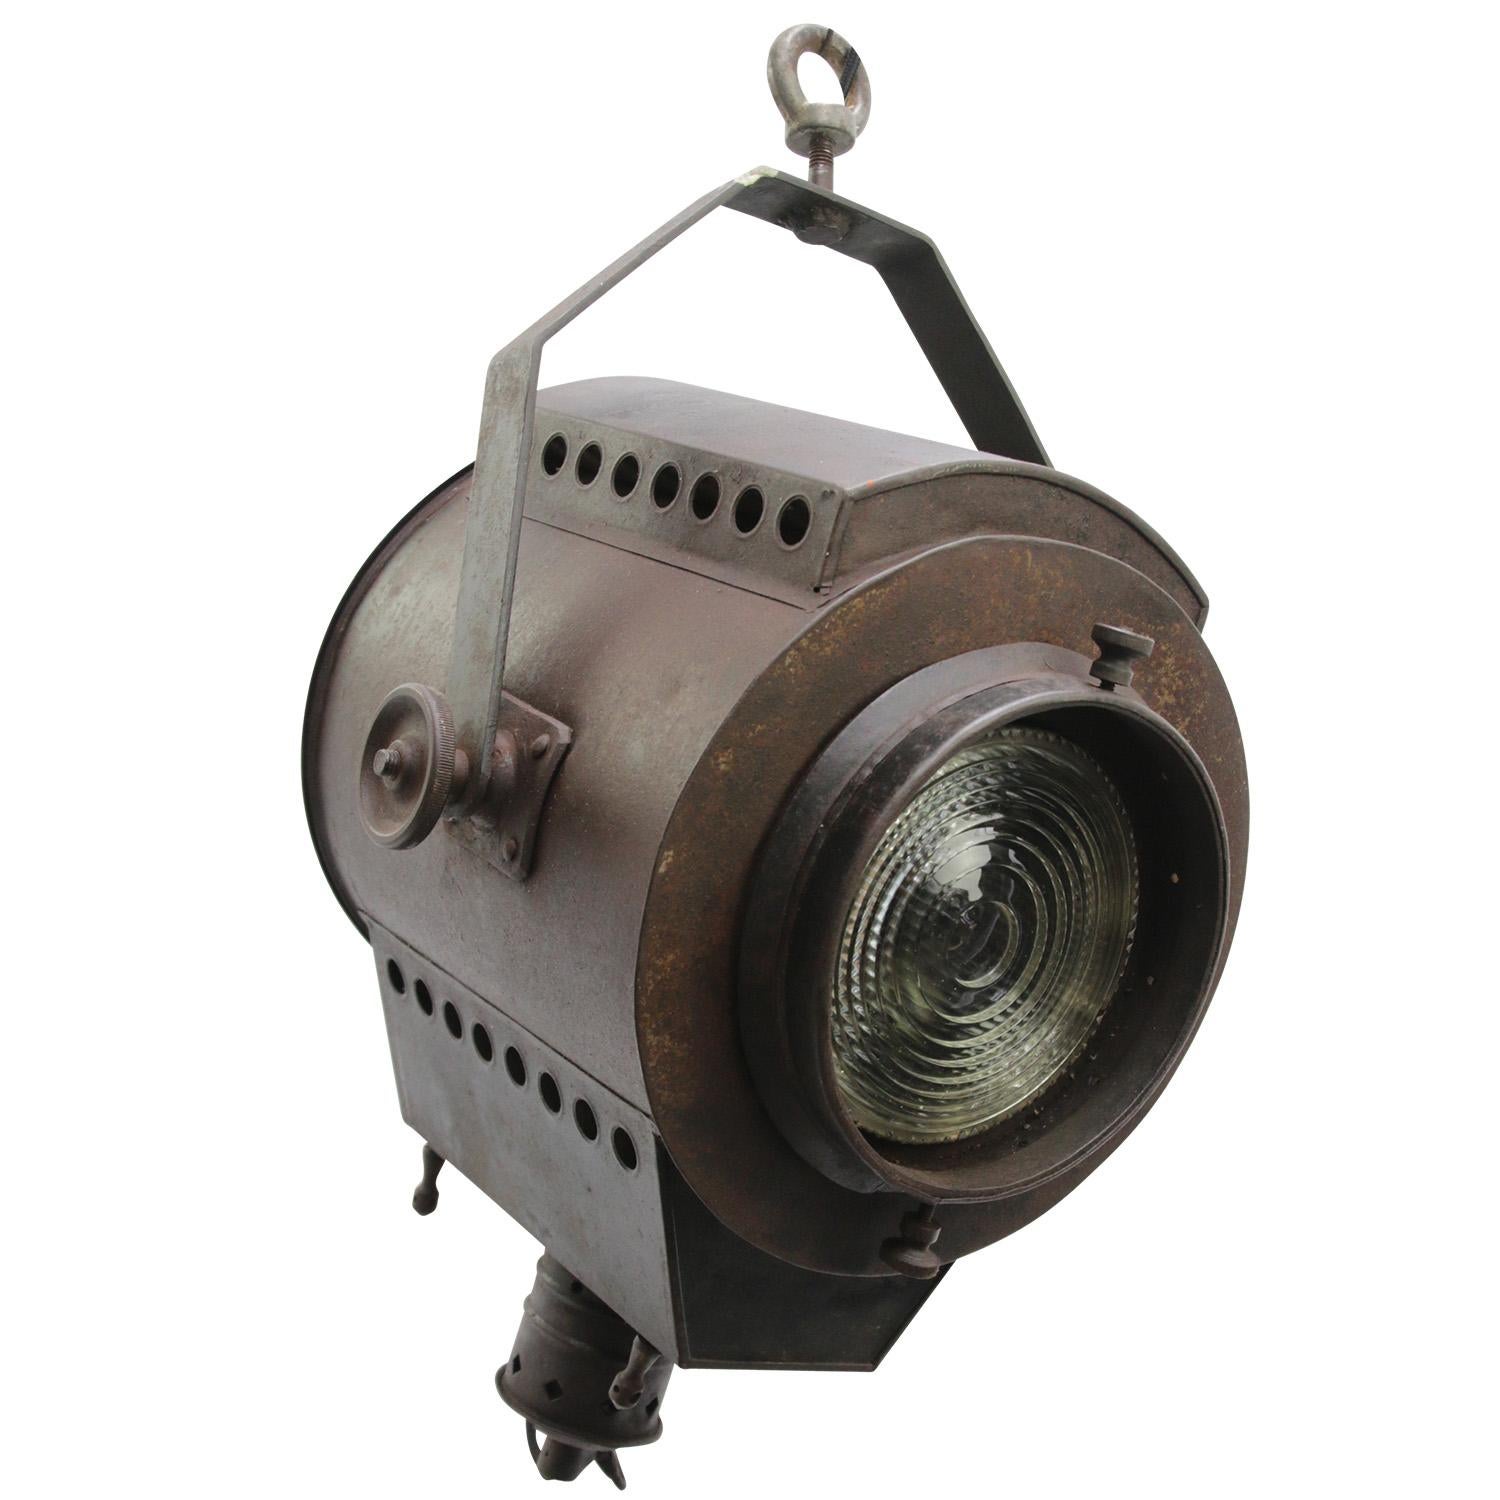 Large rust iron film spot
Iron, wood and clear glass Fresnel Lens

E27/E26

Weight: 9.60 kg / 21.2 lb

Priced per individual item. All lamps have been made suitable by international standards for incandescent light bulbs, energy-efficient and